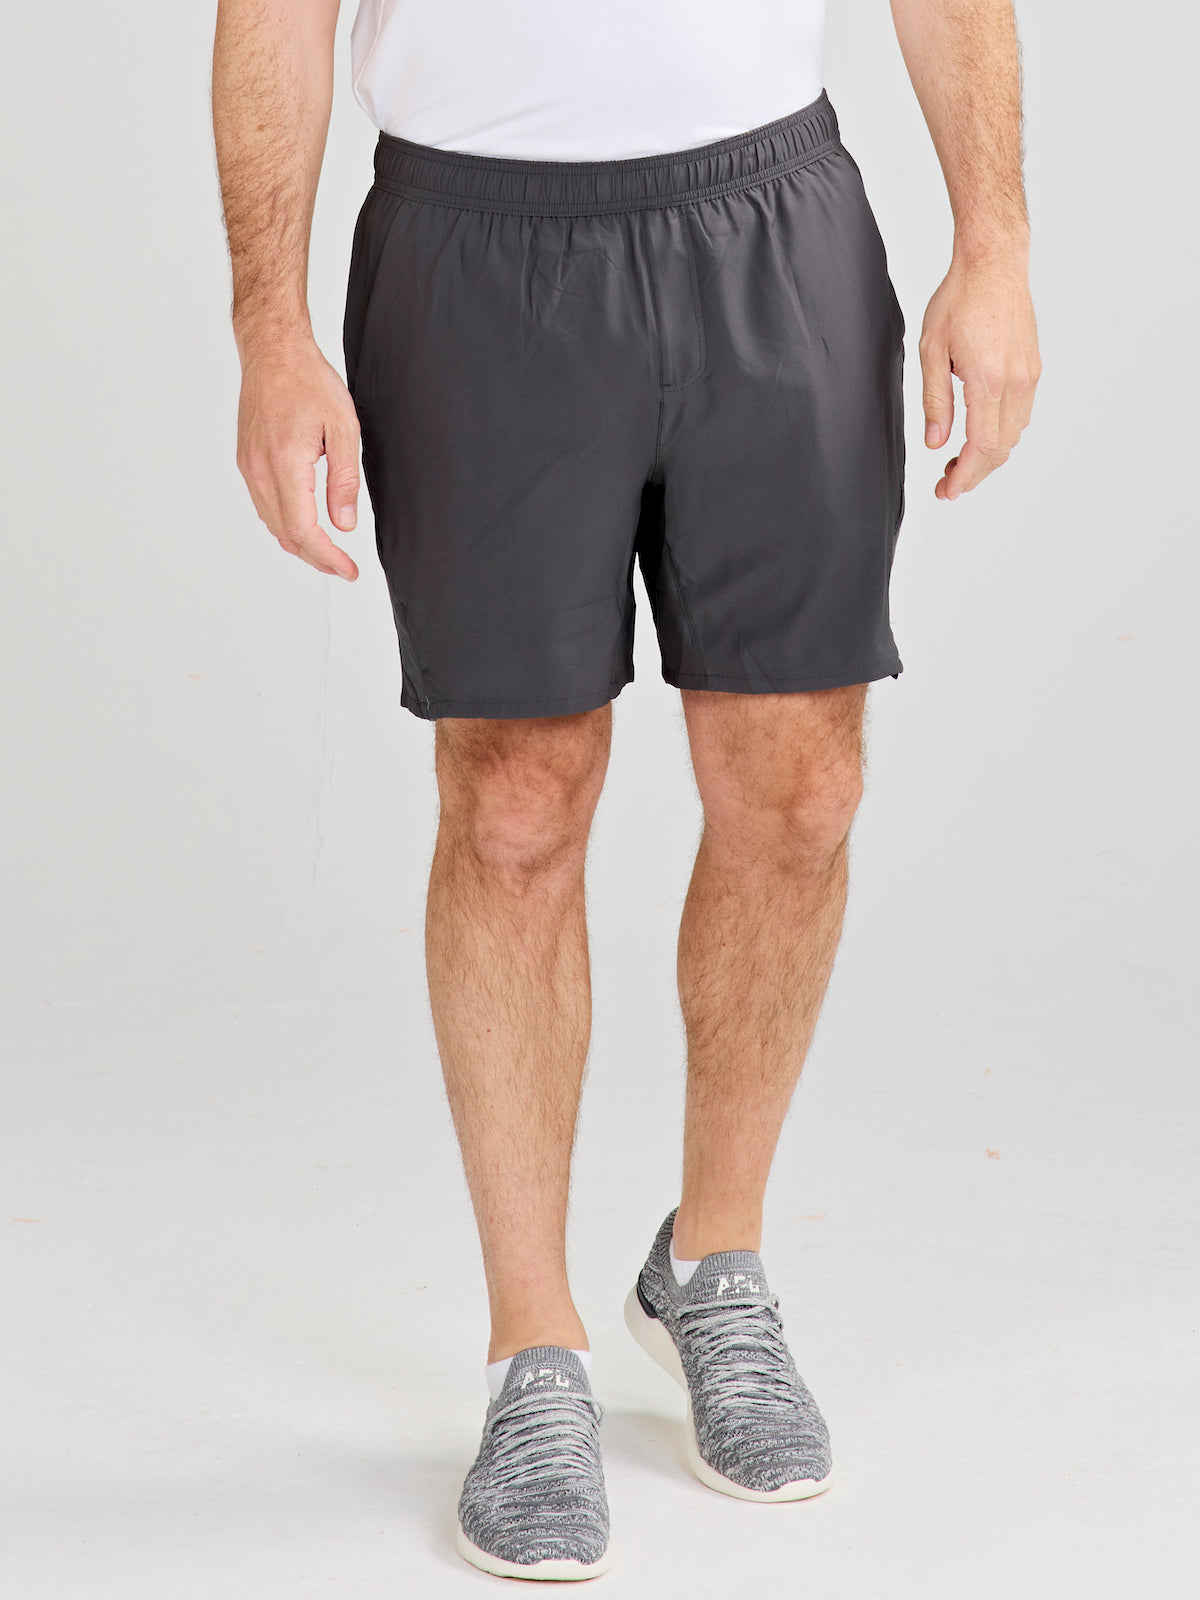 Activewear & Athletic Clothing: Comfortable Apparel Made Better